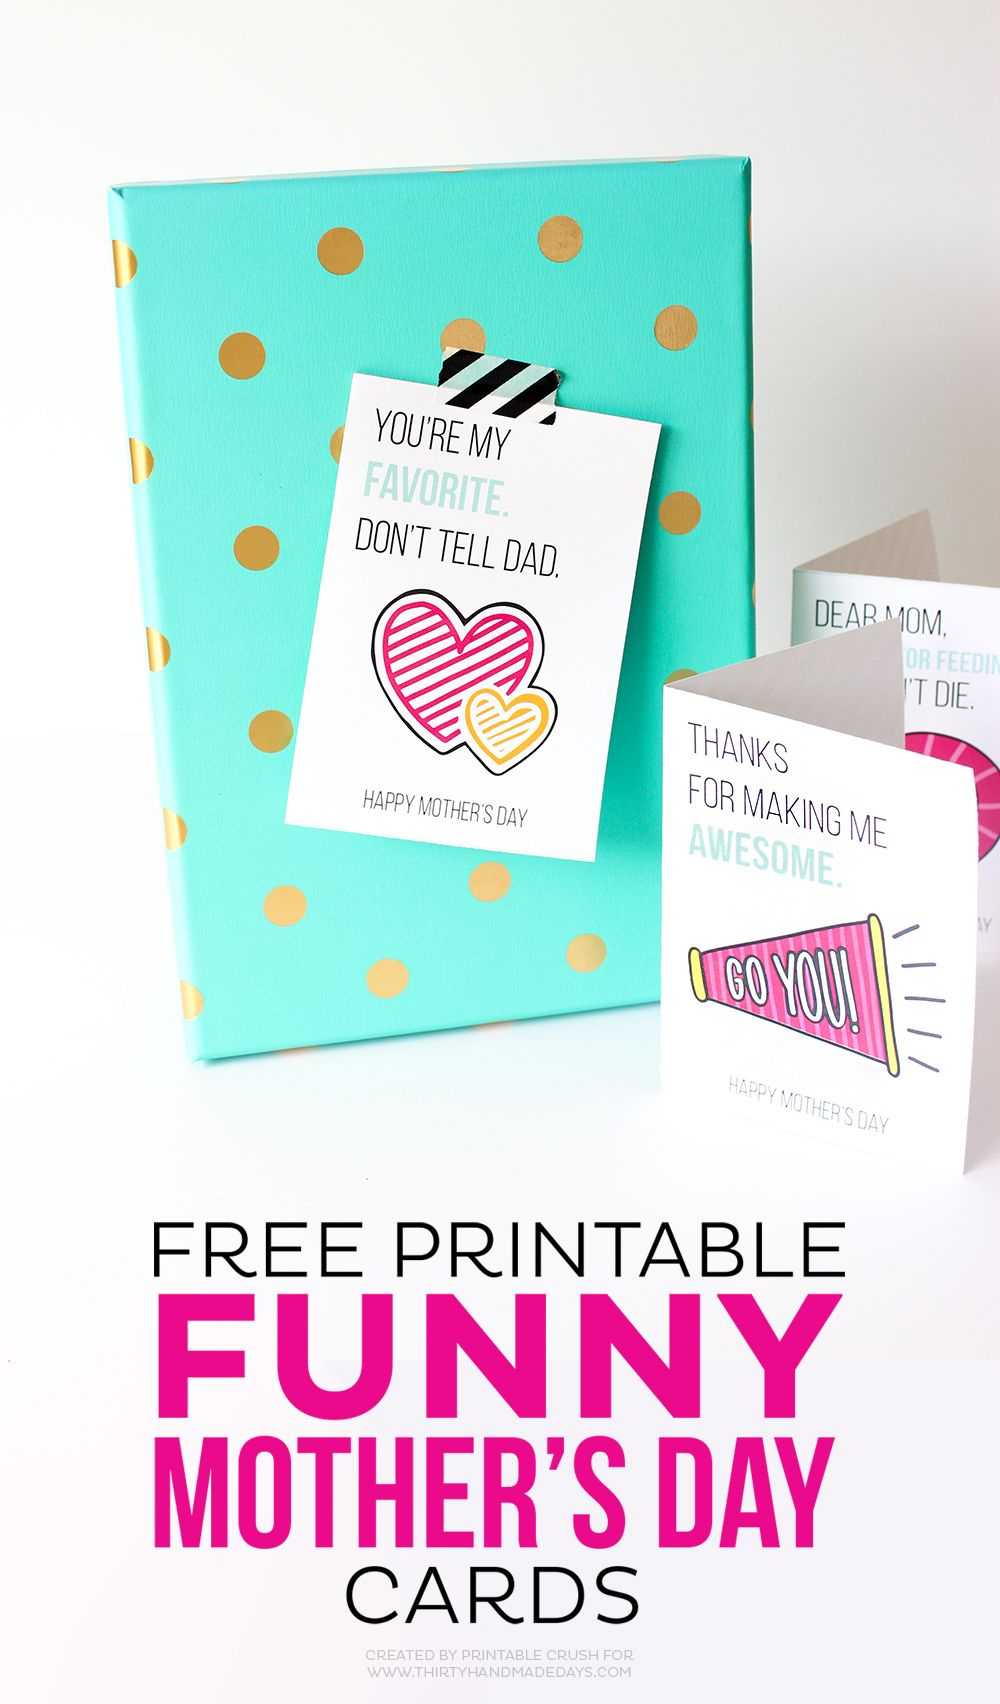 Printable Funny Mother&amp;#039;s Day Cards | Holiday Stuff | Pinterest - Free Printable Funny Mother&amp;#039;s Day Cards